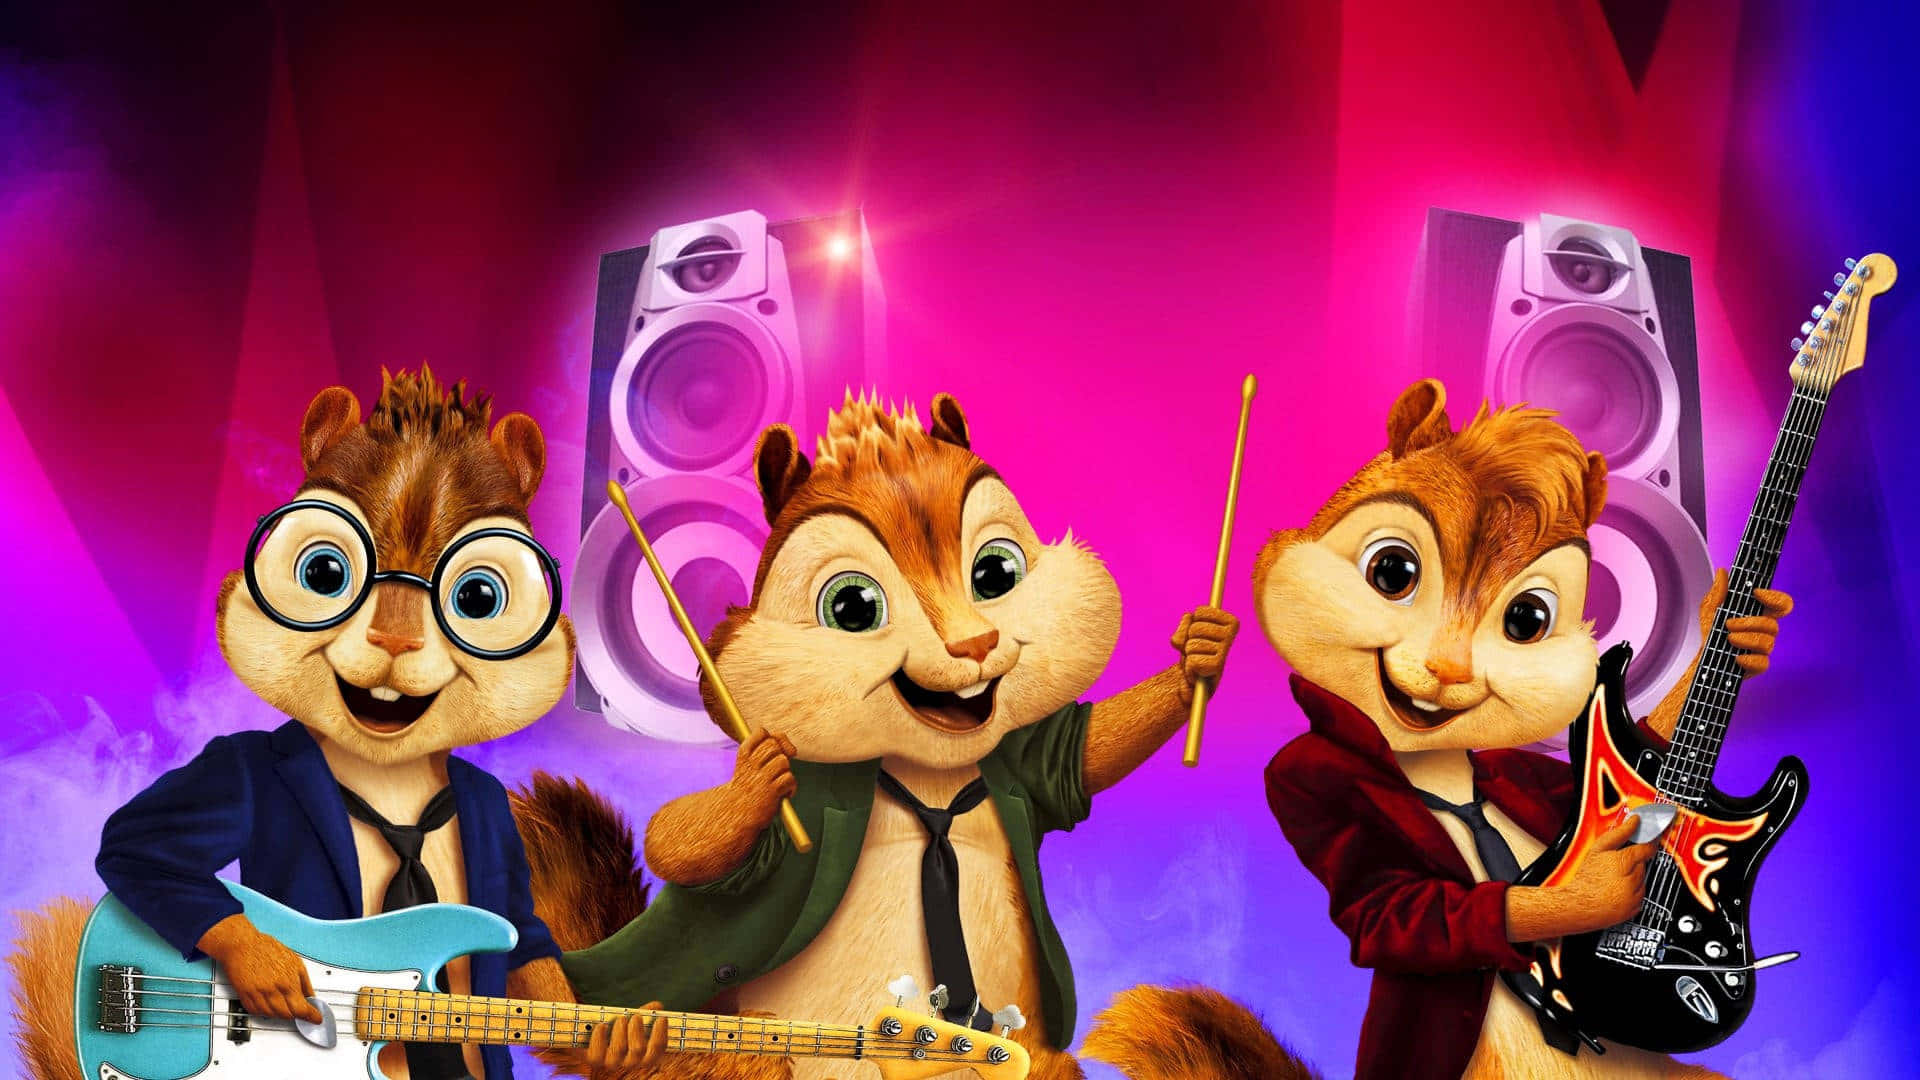 Celebrating friendship and music with Alvin, Simon and Theodore!